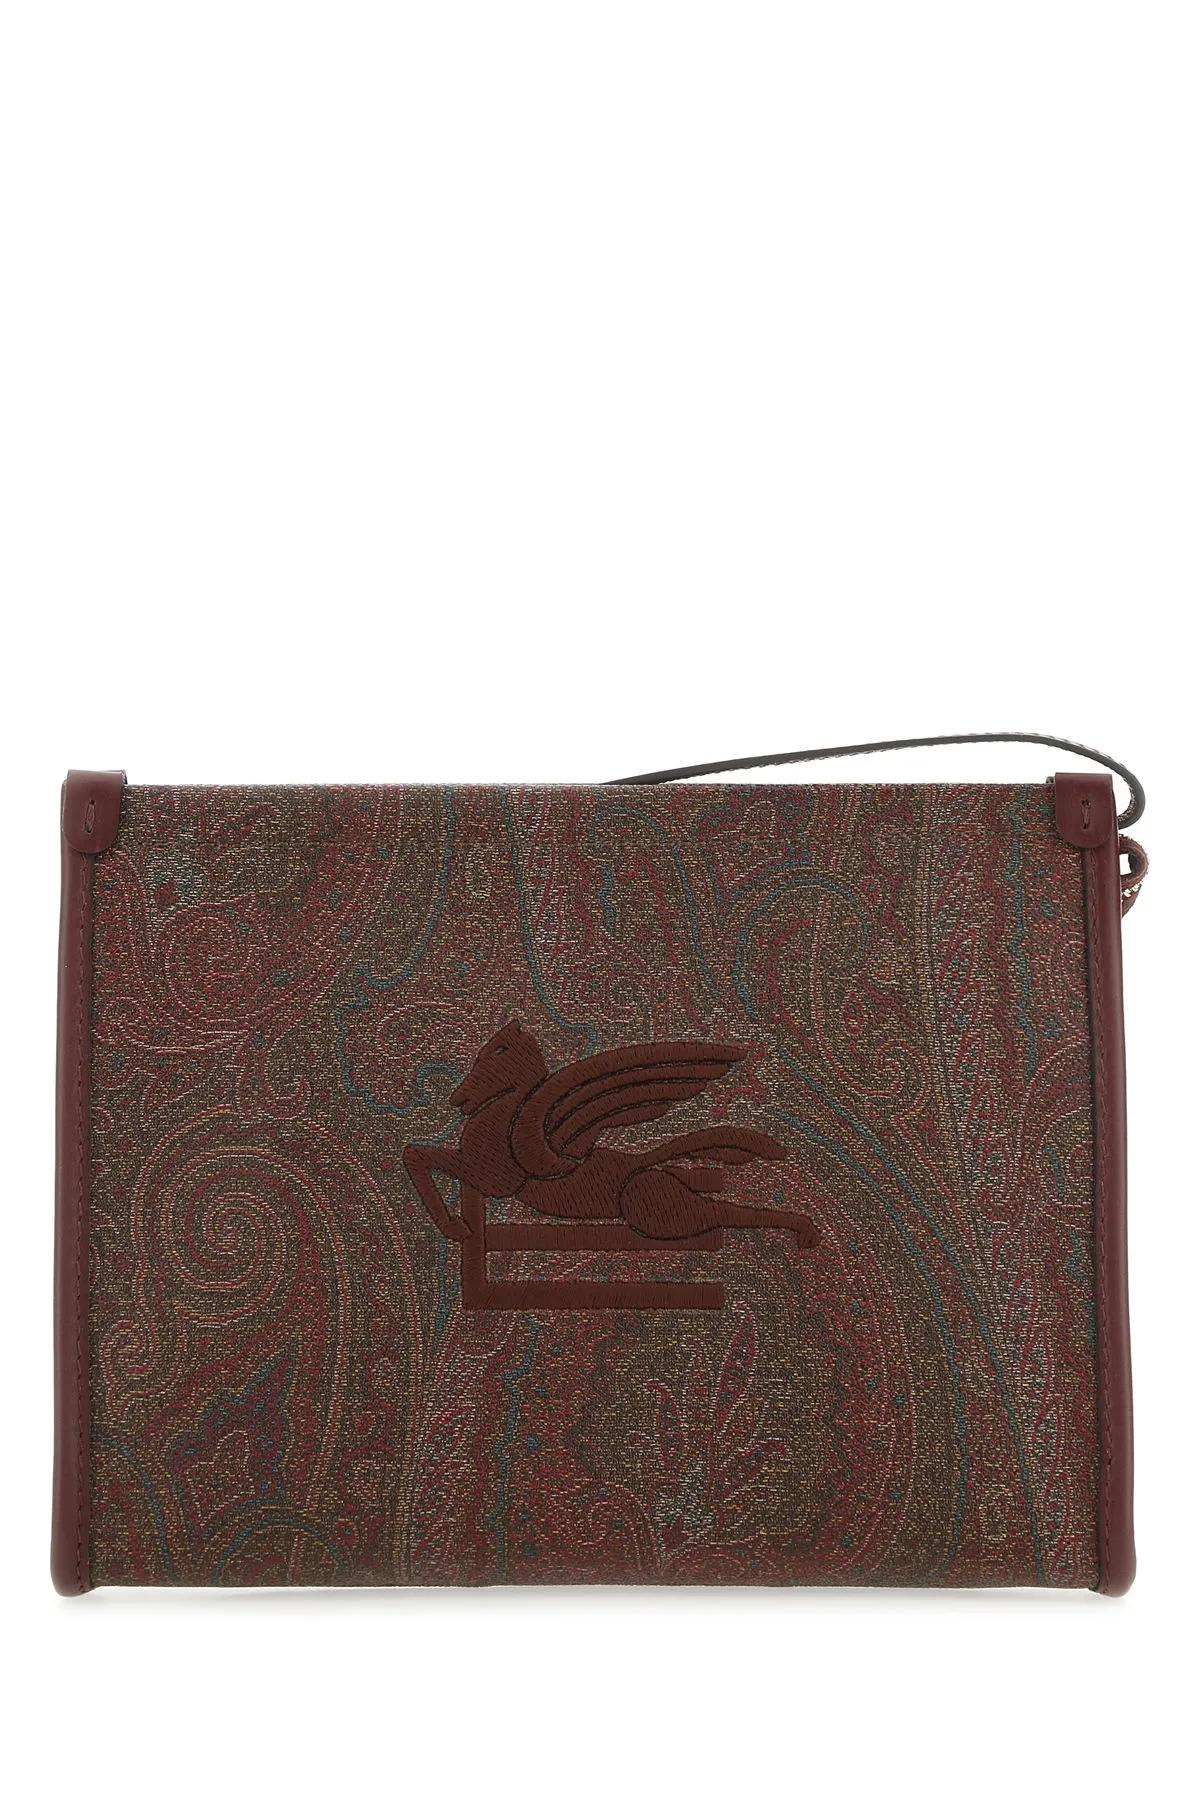 Etro Printed Fabric Pouch In Red